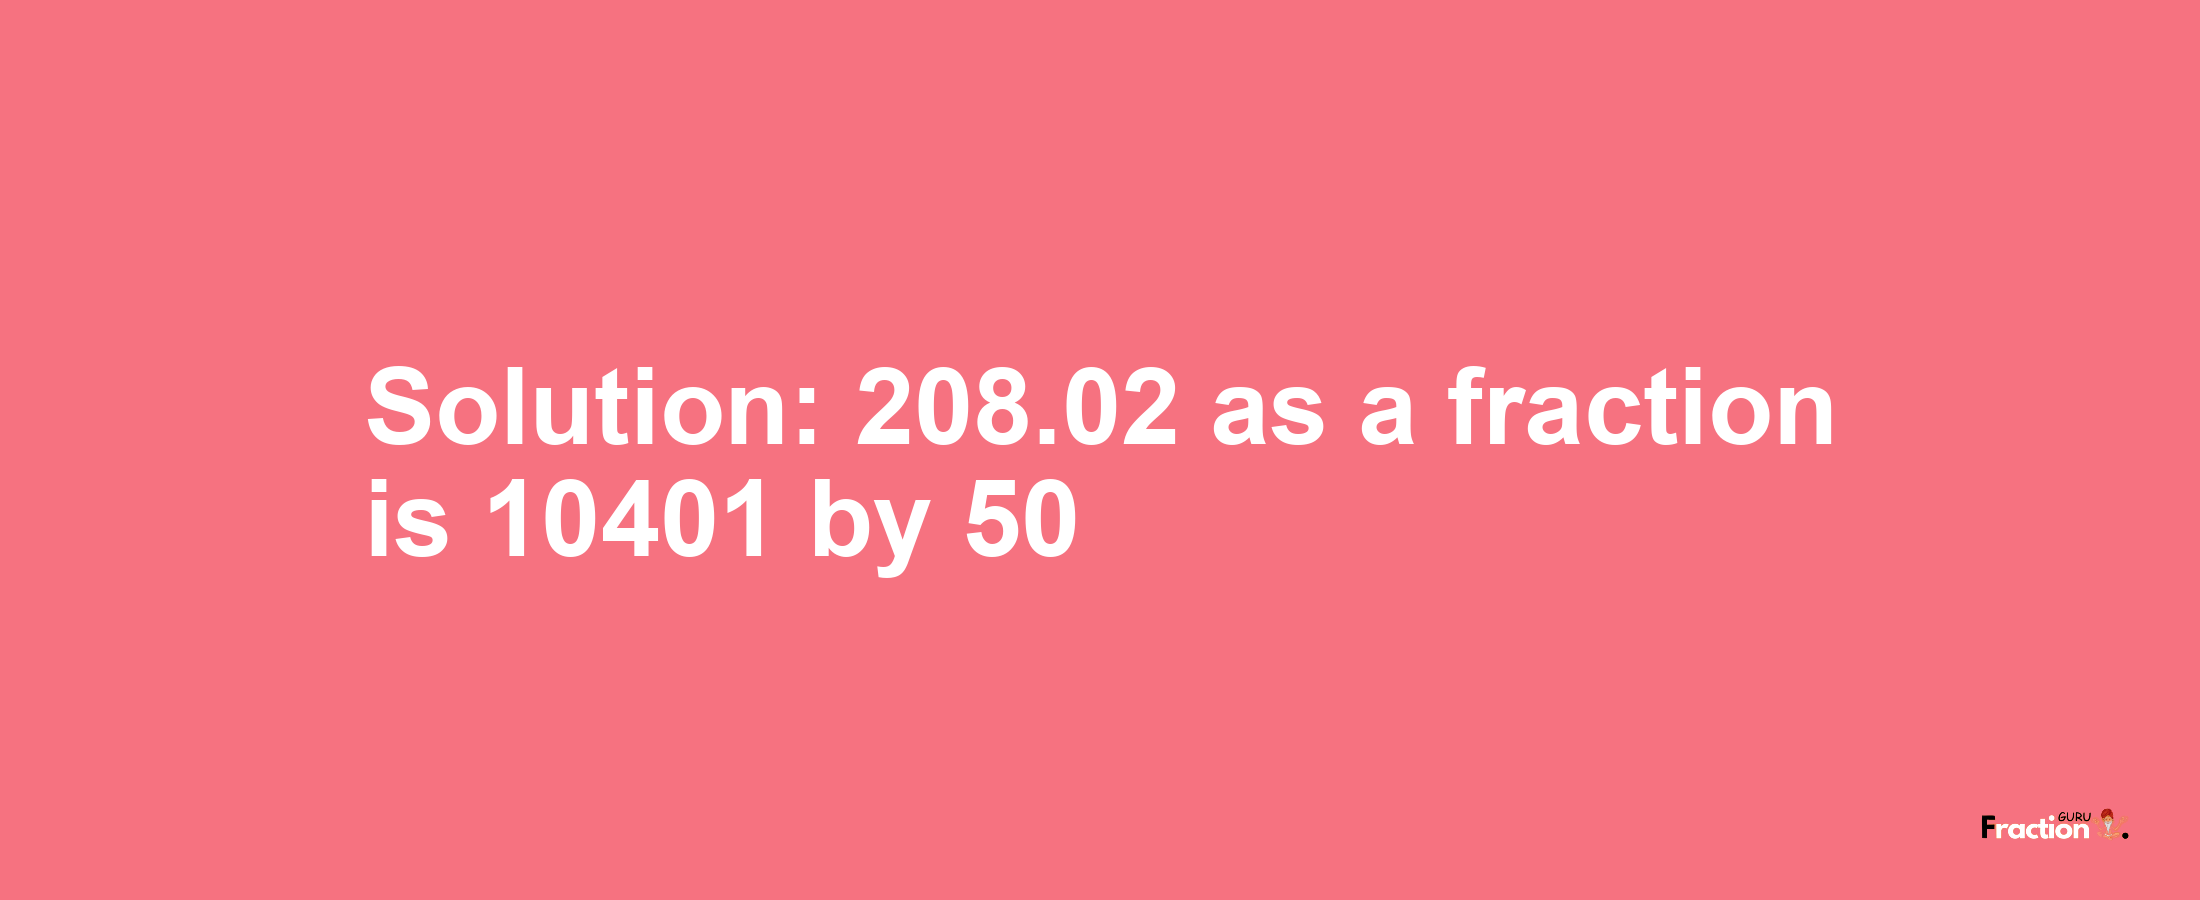 Solution:208.02 as a fraction is 10401/50